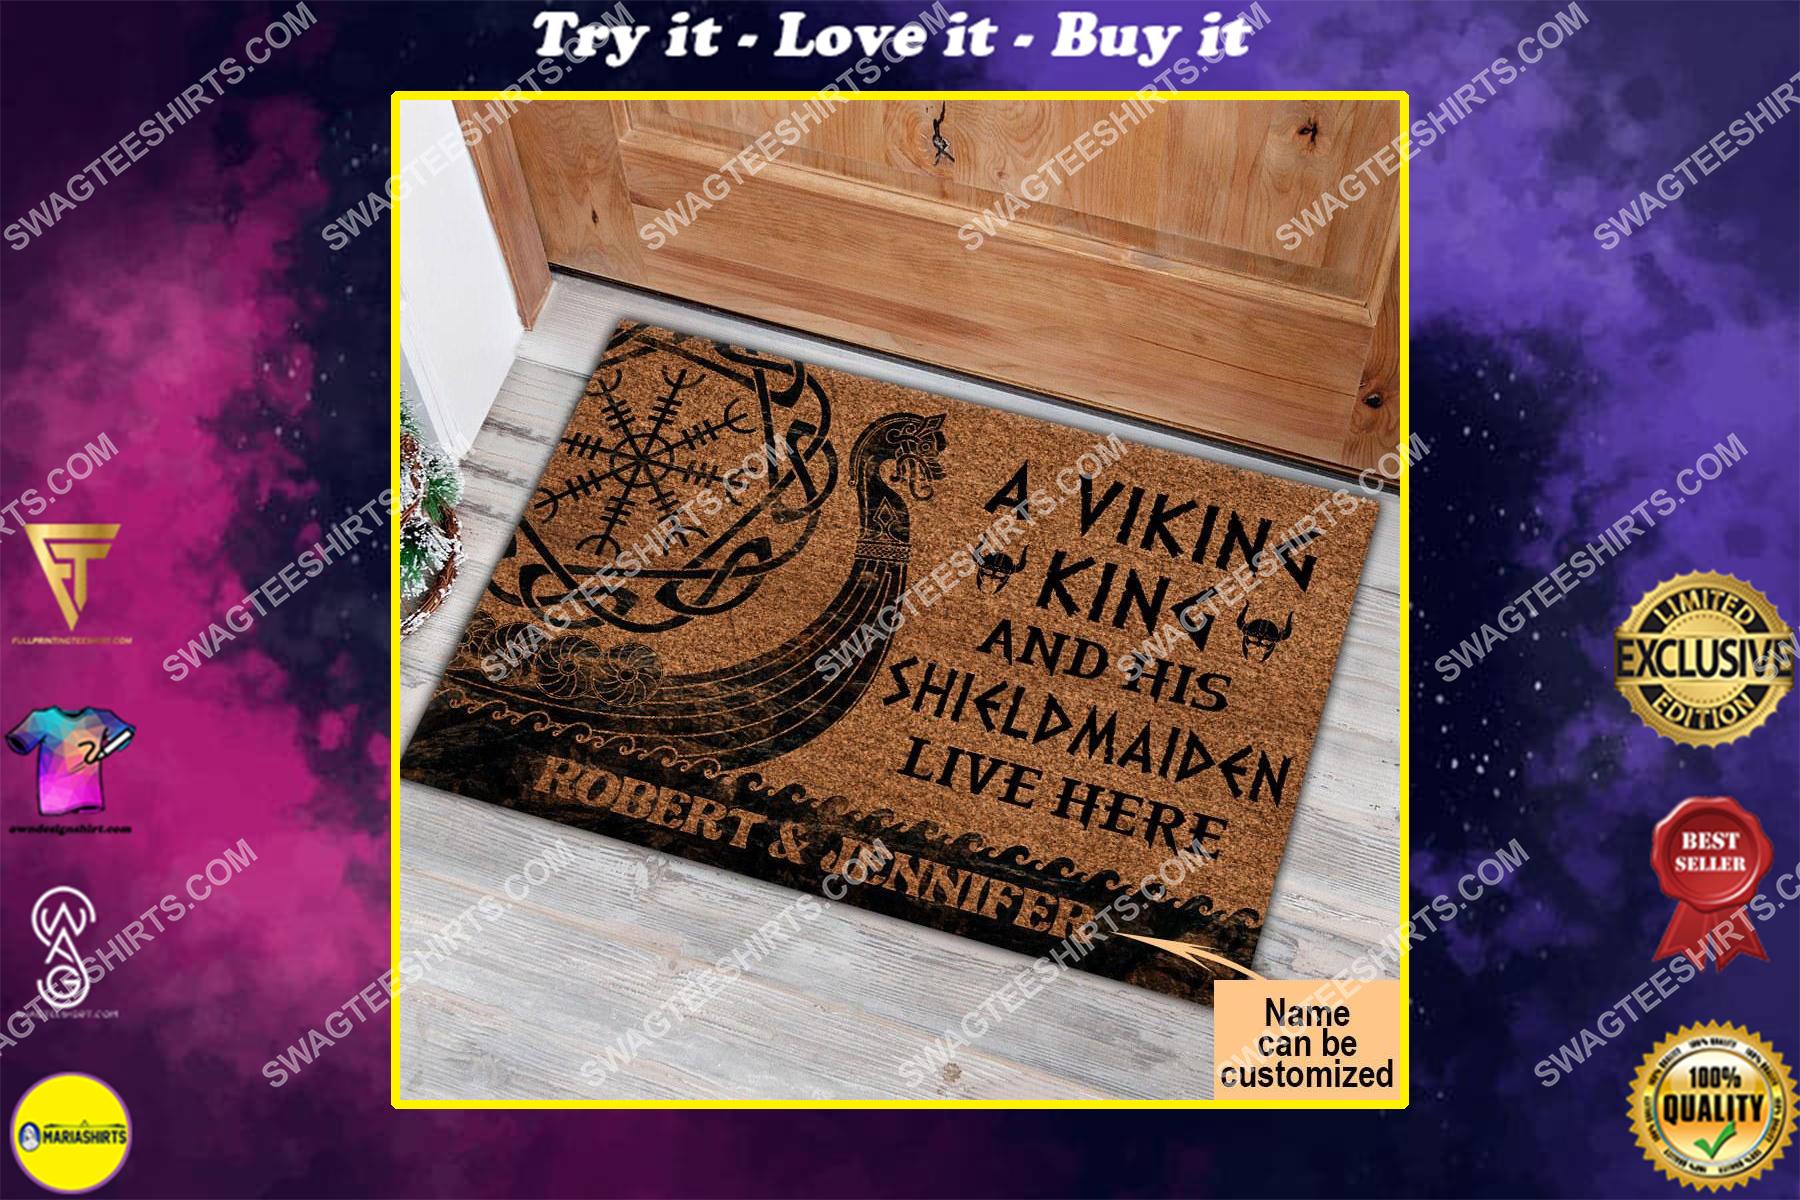 custom name a viking and his shieldmaiden live here full print doormat